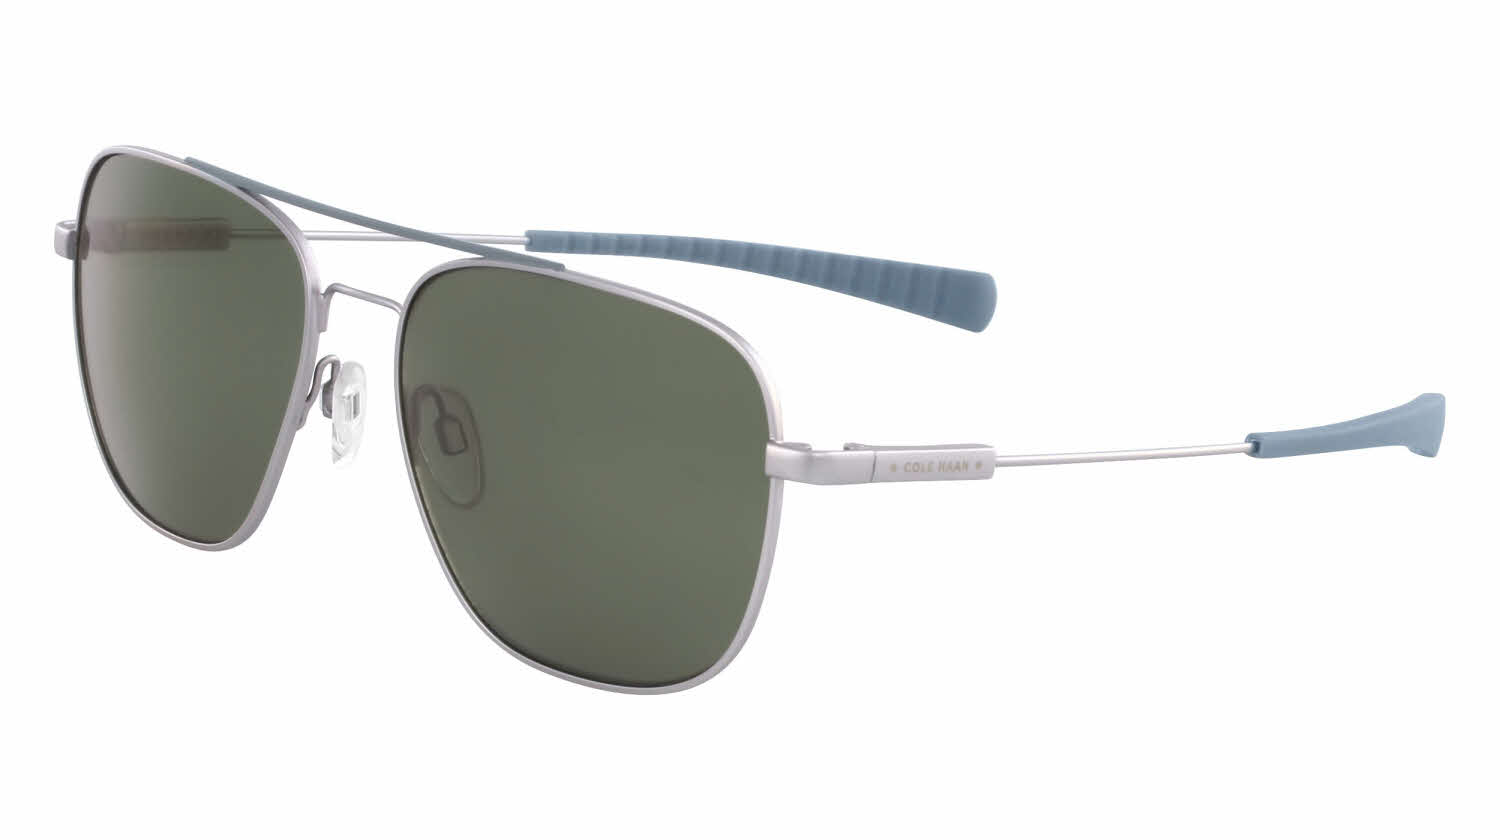 Cole Haan CH6065 Sunglasses